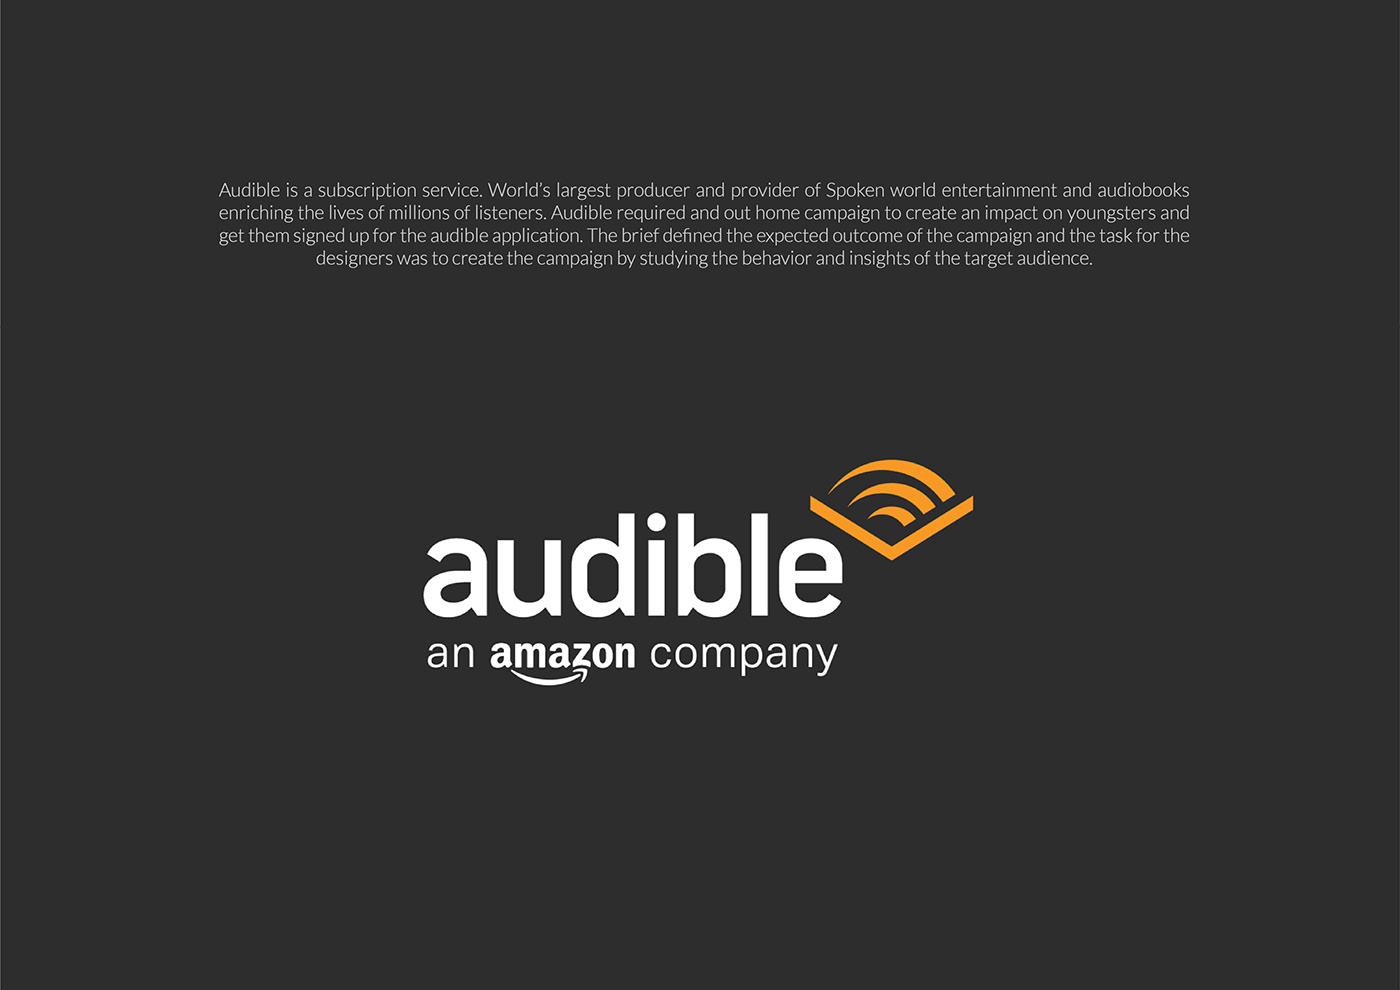 audible audiobooks book Campaign Design chronicles curiosity Interational people